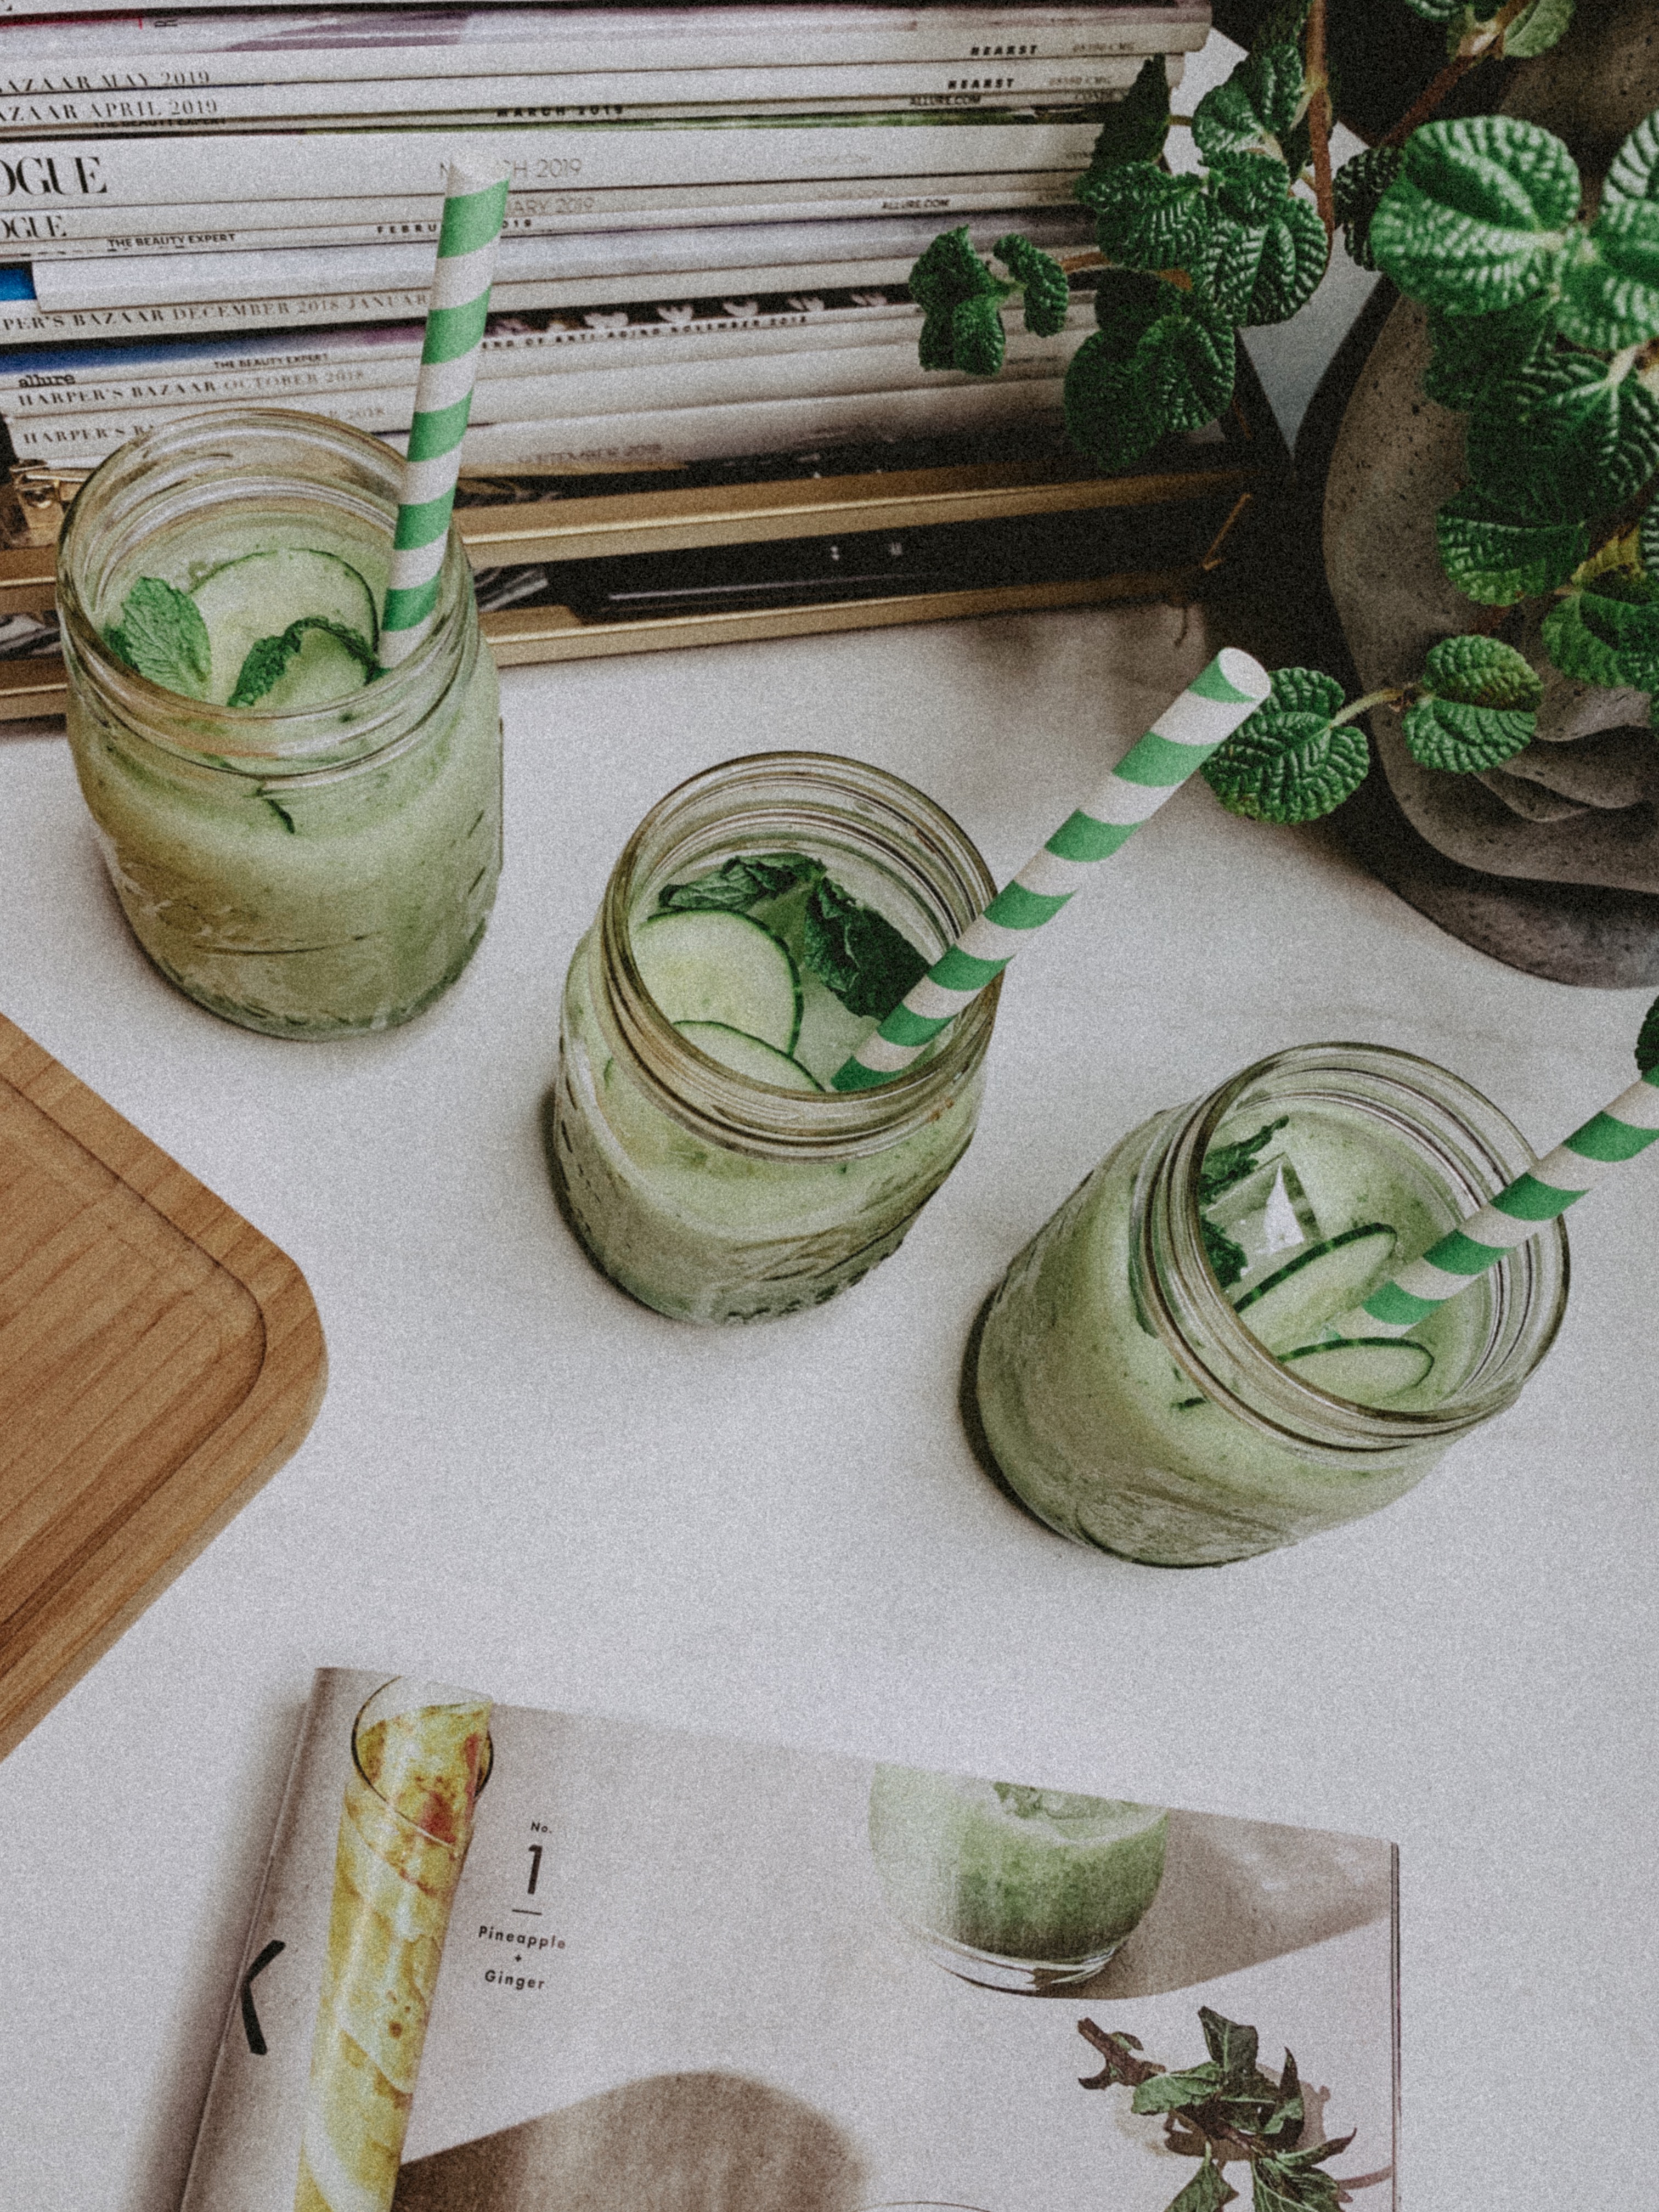 Two Summer Mocktails That Will Leave You Feeling Refreshed- Honeydew Cucumber Mint Mocktail - Simply by Simone #cheers #cocktails #mocktails #drinks #summer #refreshed #blogger #lifestyle #lifestyleblog #lifestyleblogger #cocktail #mocktail #honeydew #paperstraws #decor #flowers #cocktailcourier